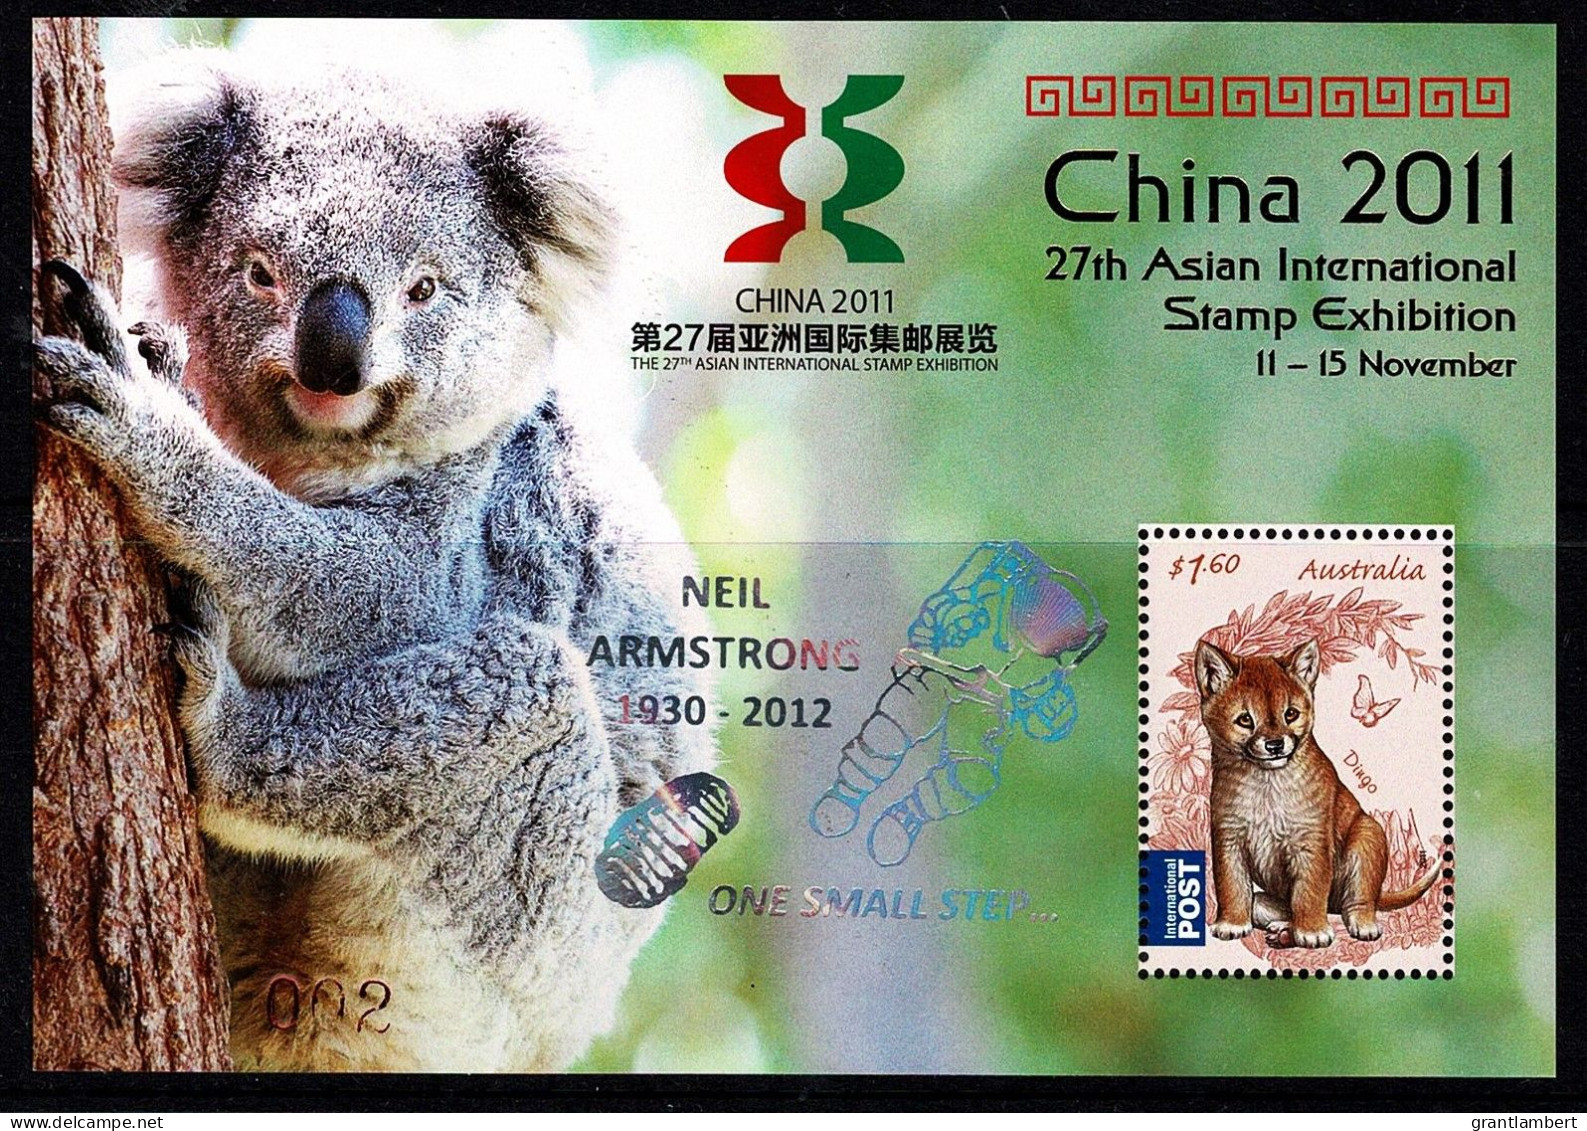 Australia 2011 China 2011 Exhib. Minisheet OP NEIL ARMSTRONG -One Small Step MNH - Nuevos